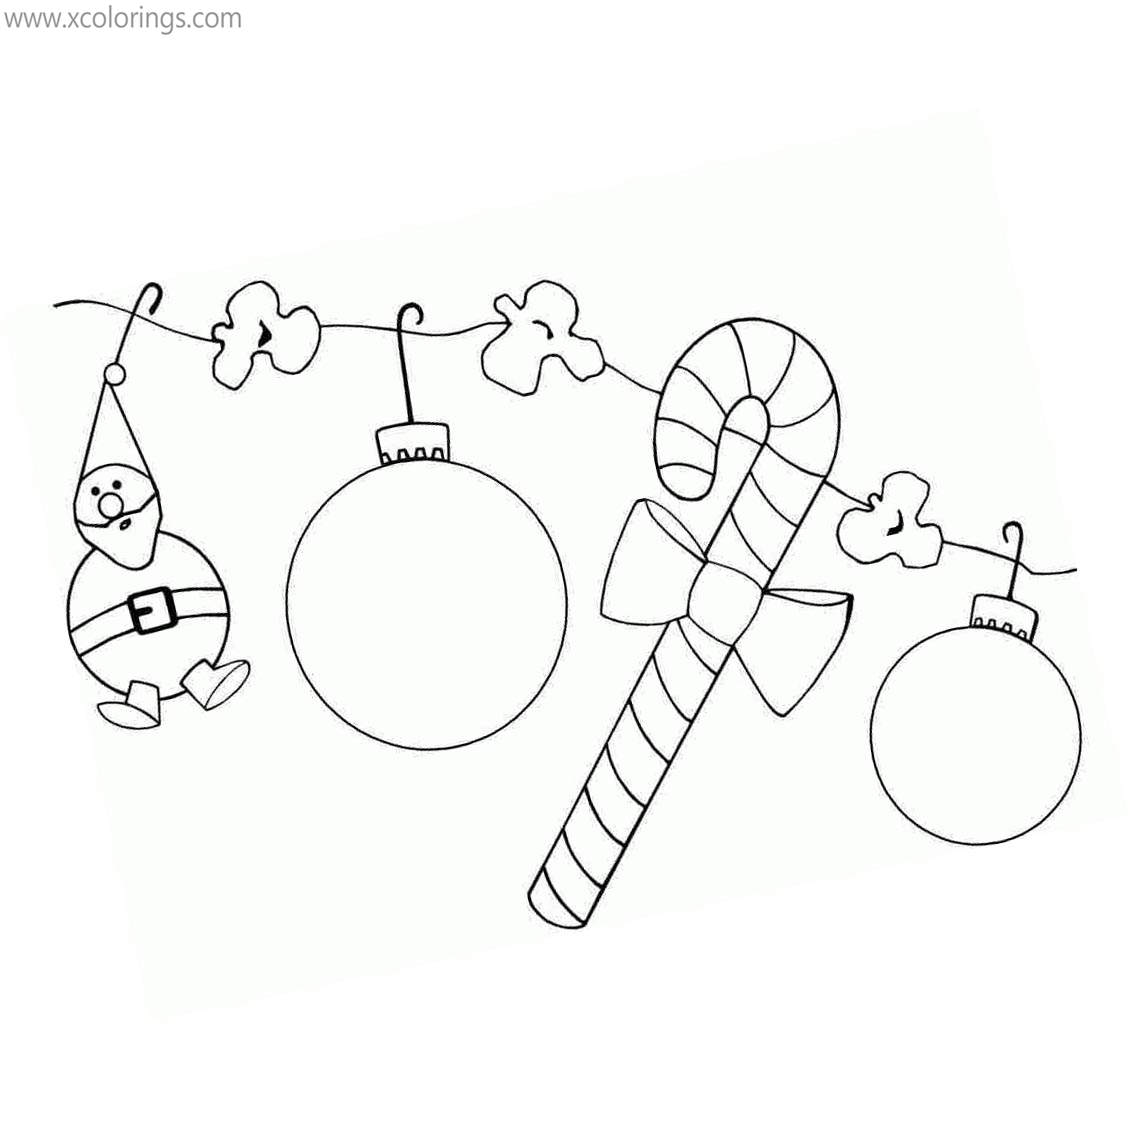 Free Christmas Ornament Coloring Pages with Candy Cane printable